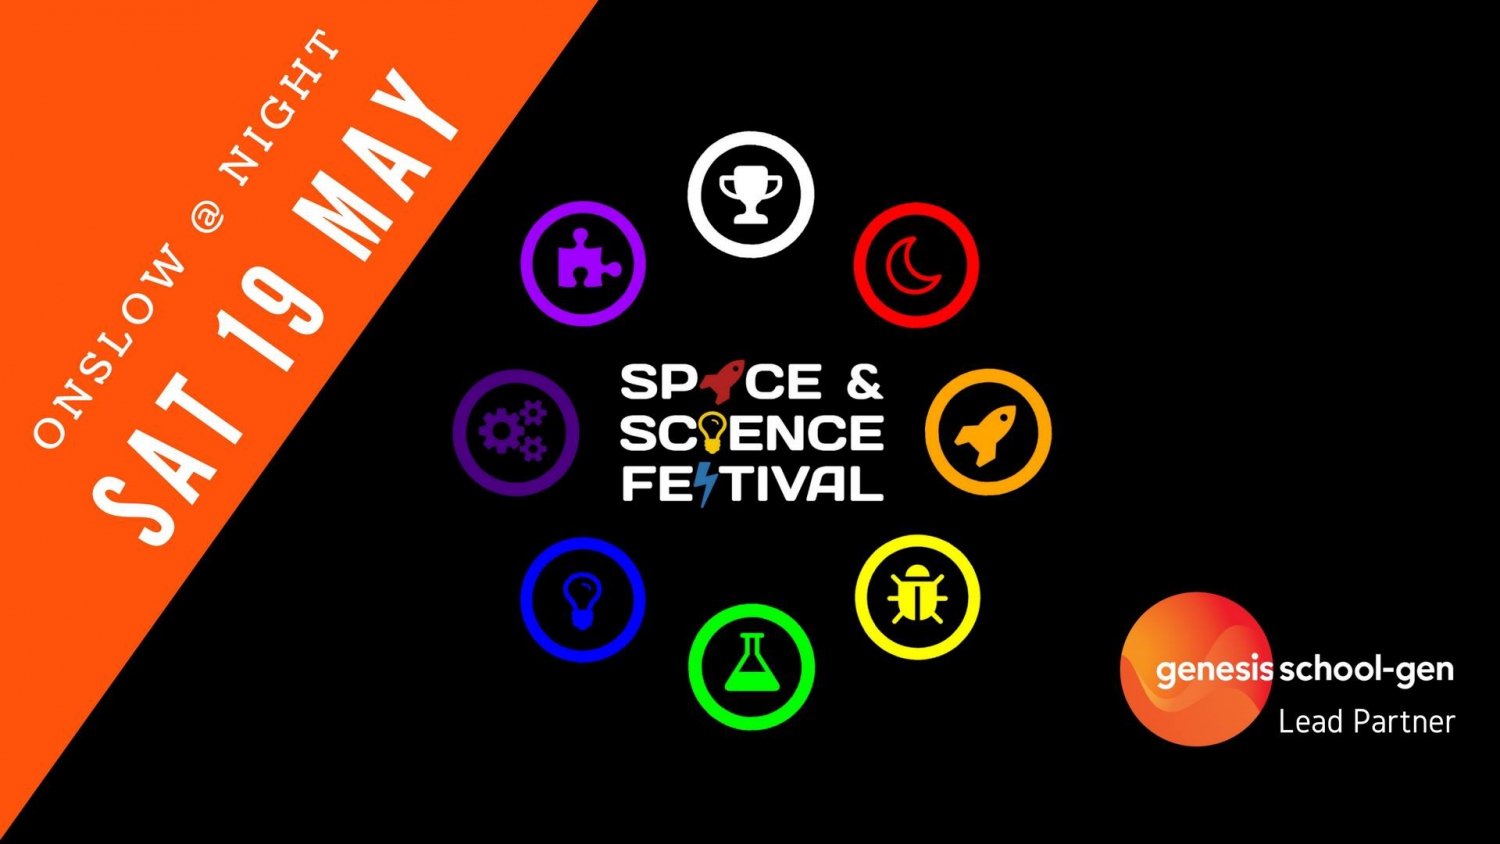 Space & Science Festival 2018 @Night